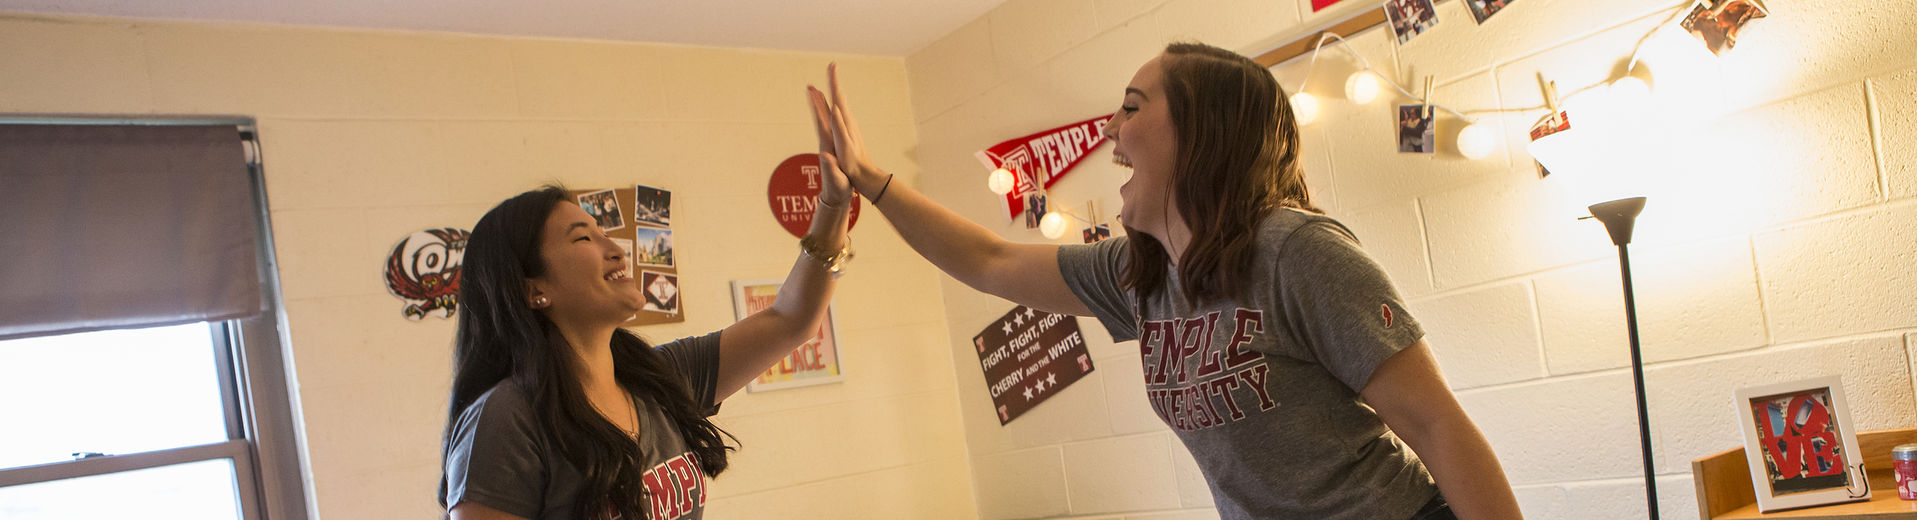 Two female students high-fiving in their on-campus residence hall